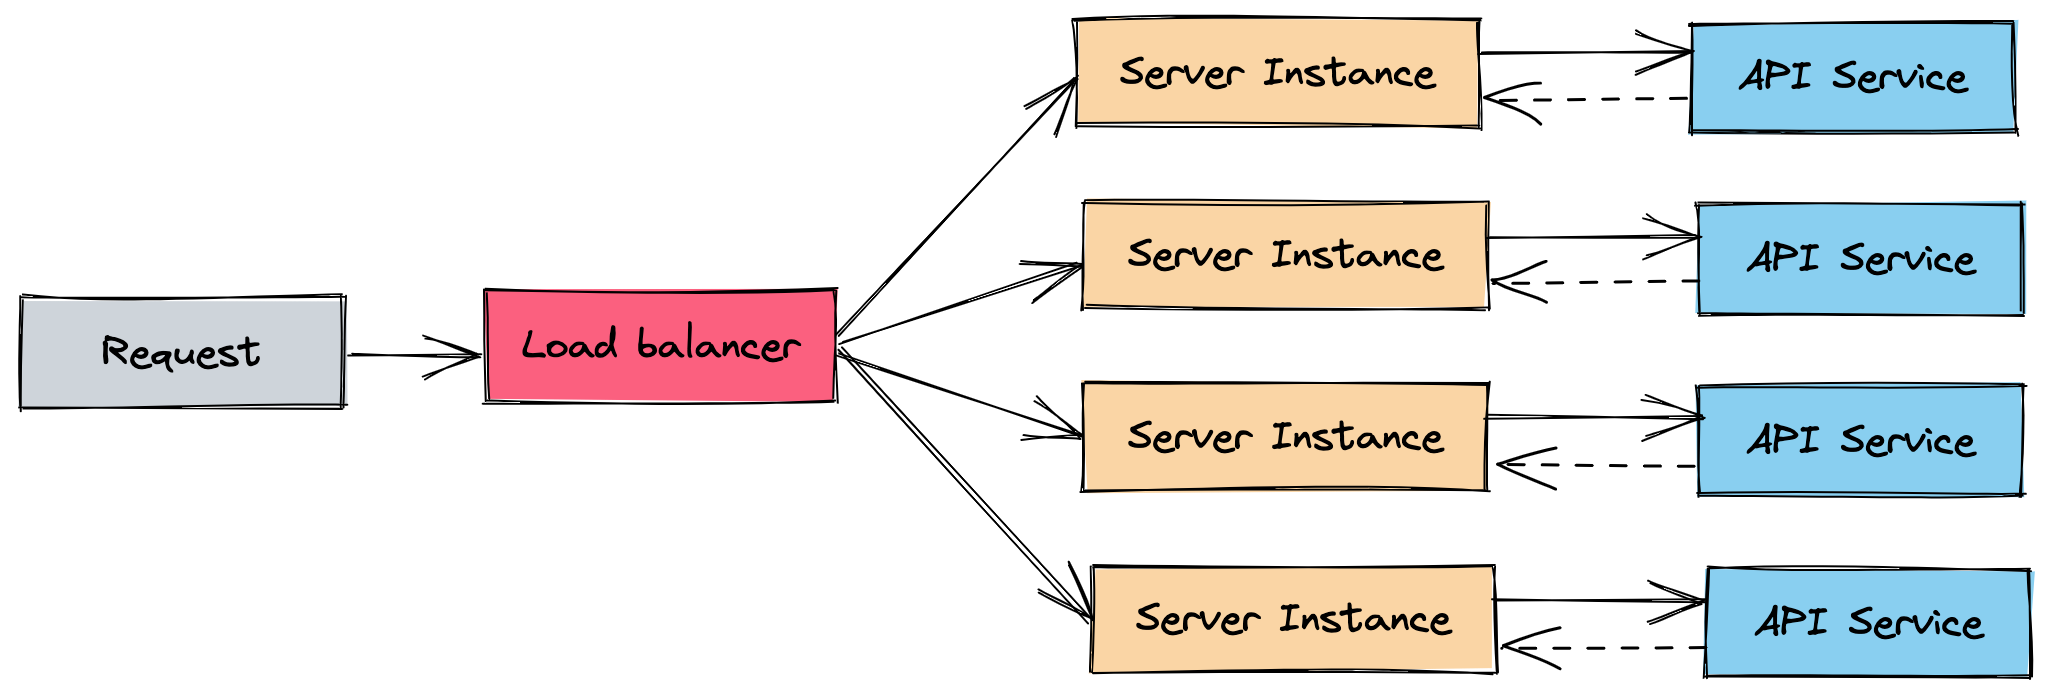 Diagram showing how with more instances, the amount of requests to the API service increases with new spawns.